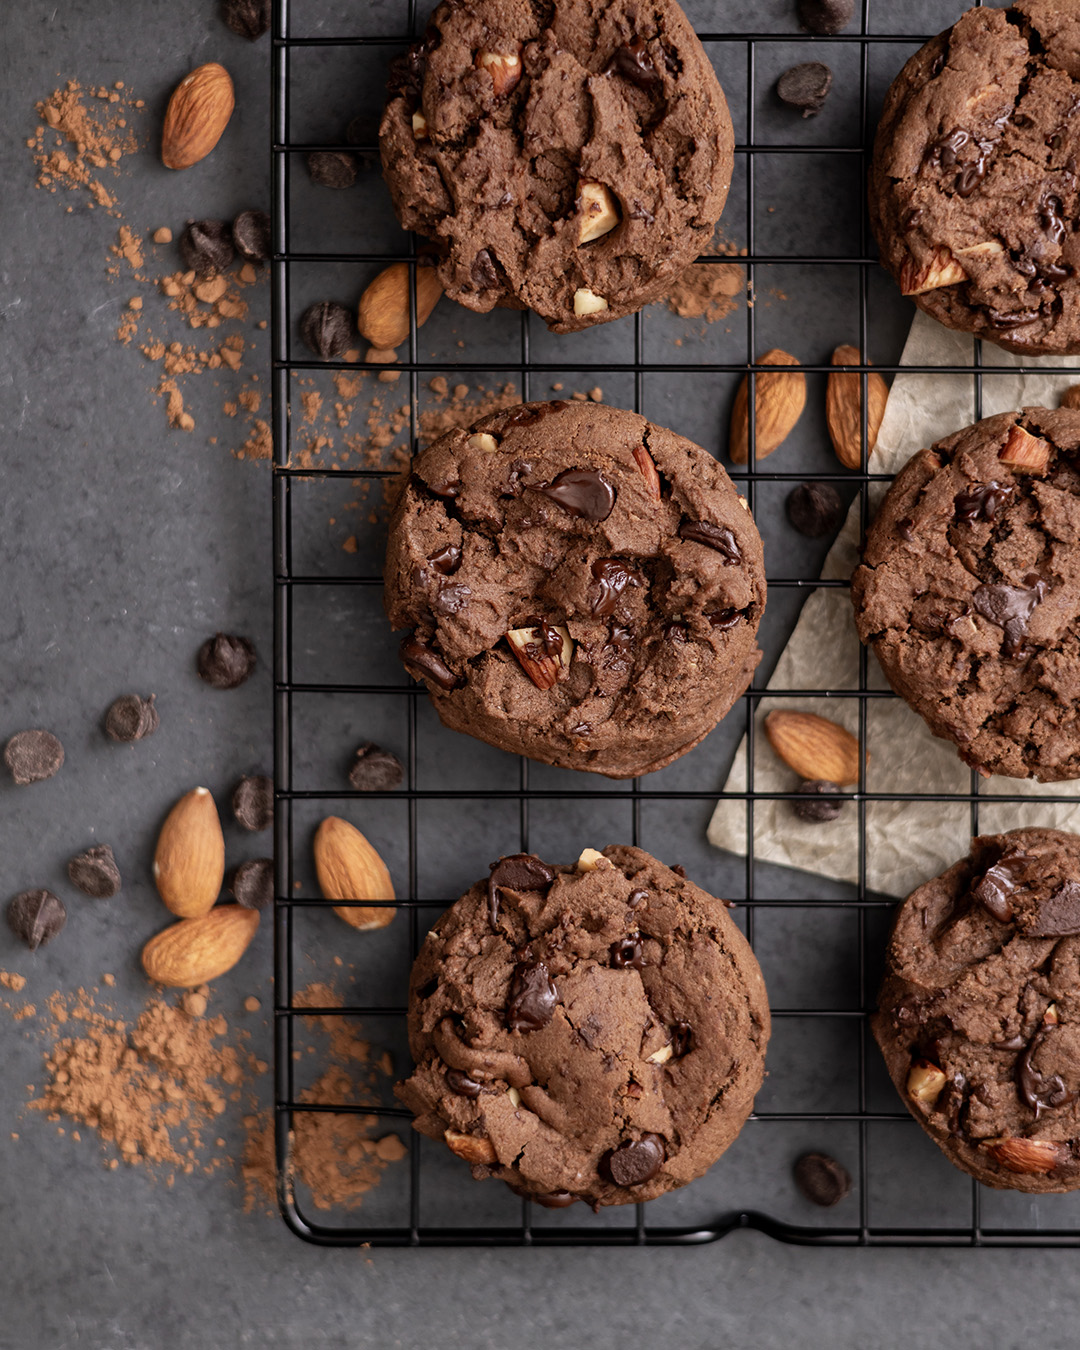 Indulgent and dark double chocolate chip cookies with roasted almonds.